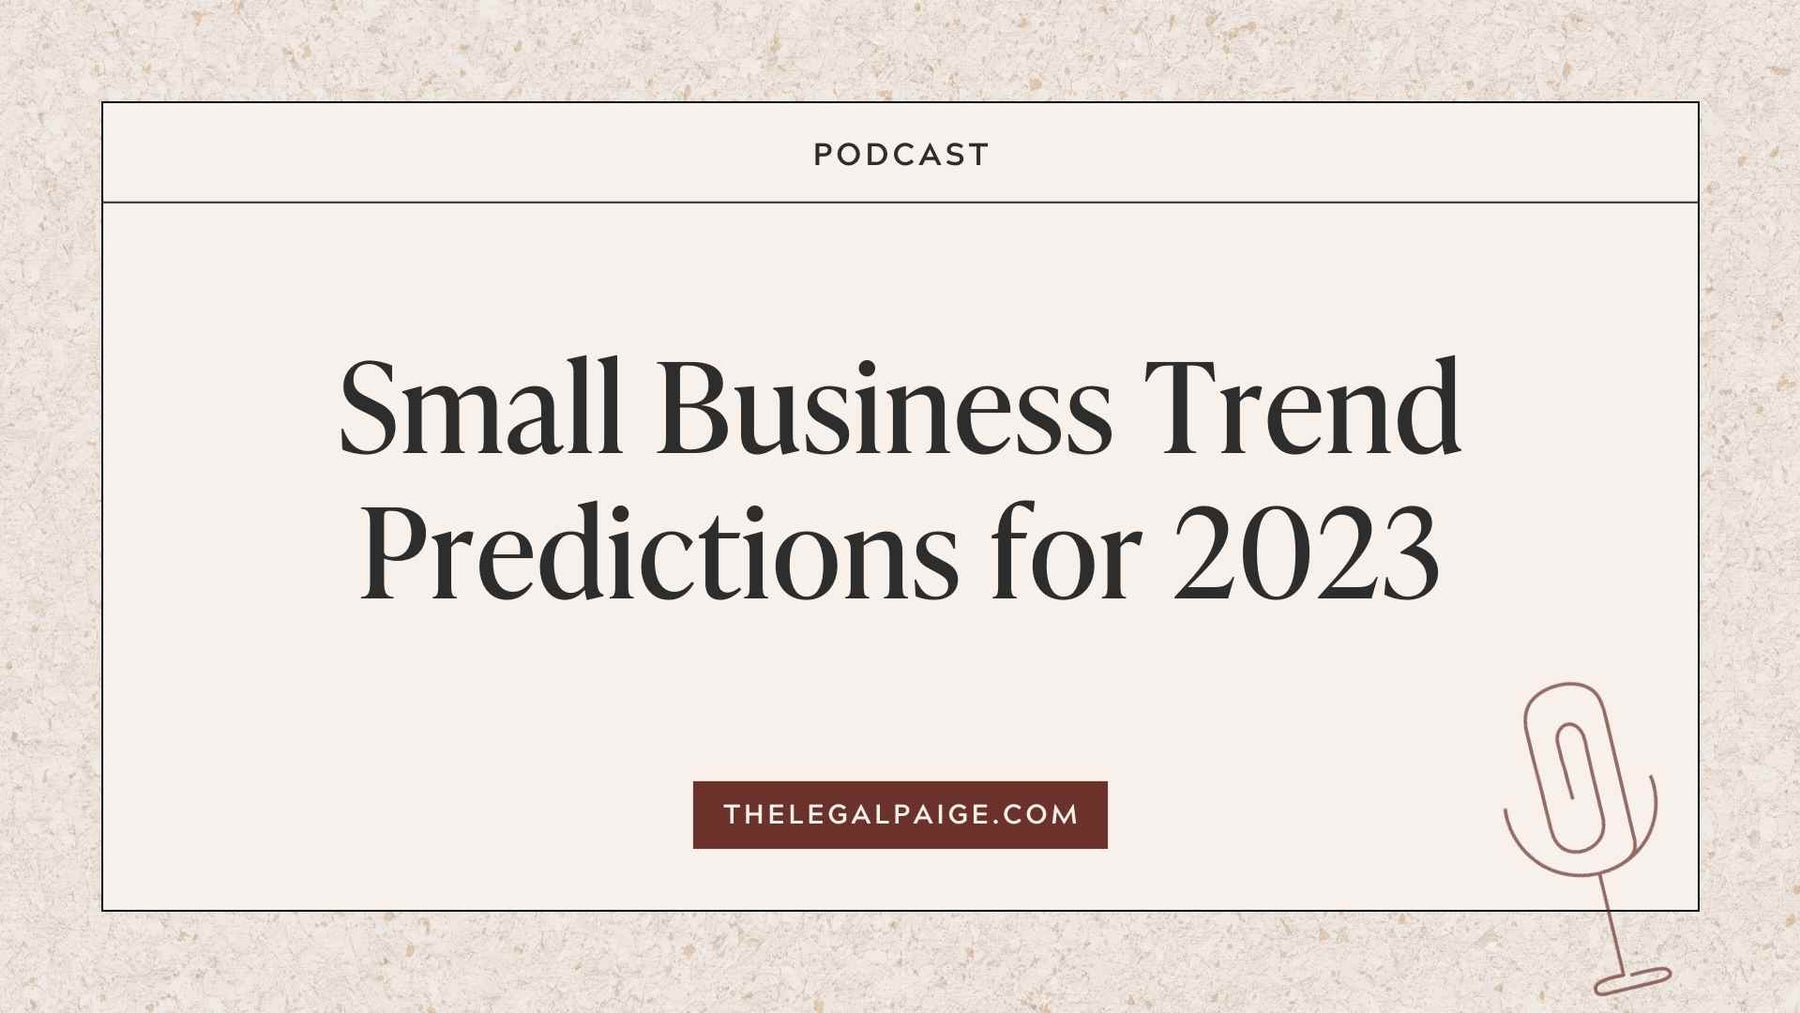 Small Business Trend Predictions for 2023